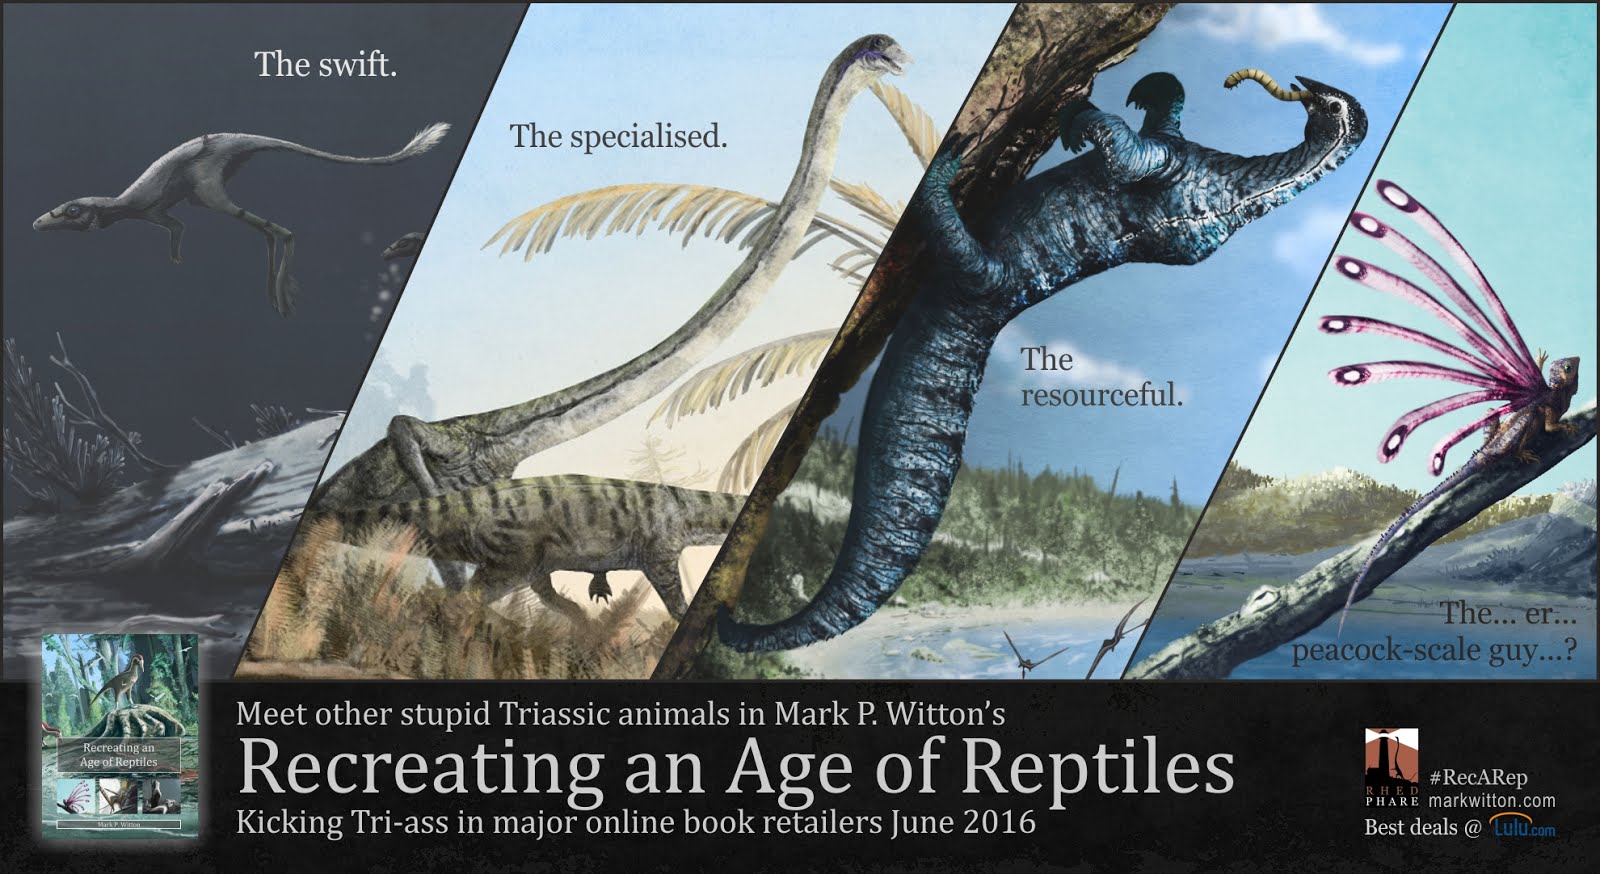 Mark P. Witton's Blog: Recreating an Age of Reptiles: the motion picture  (and other promotional material)